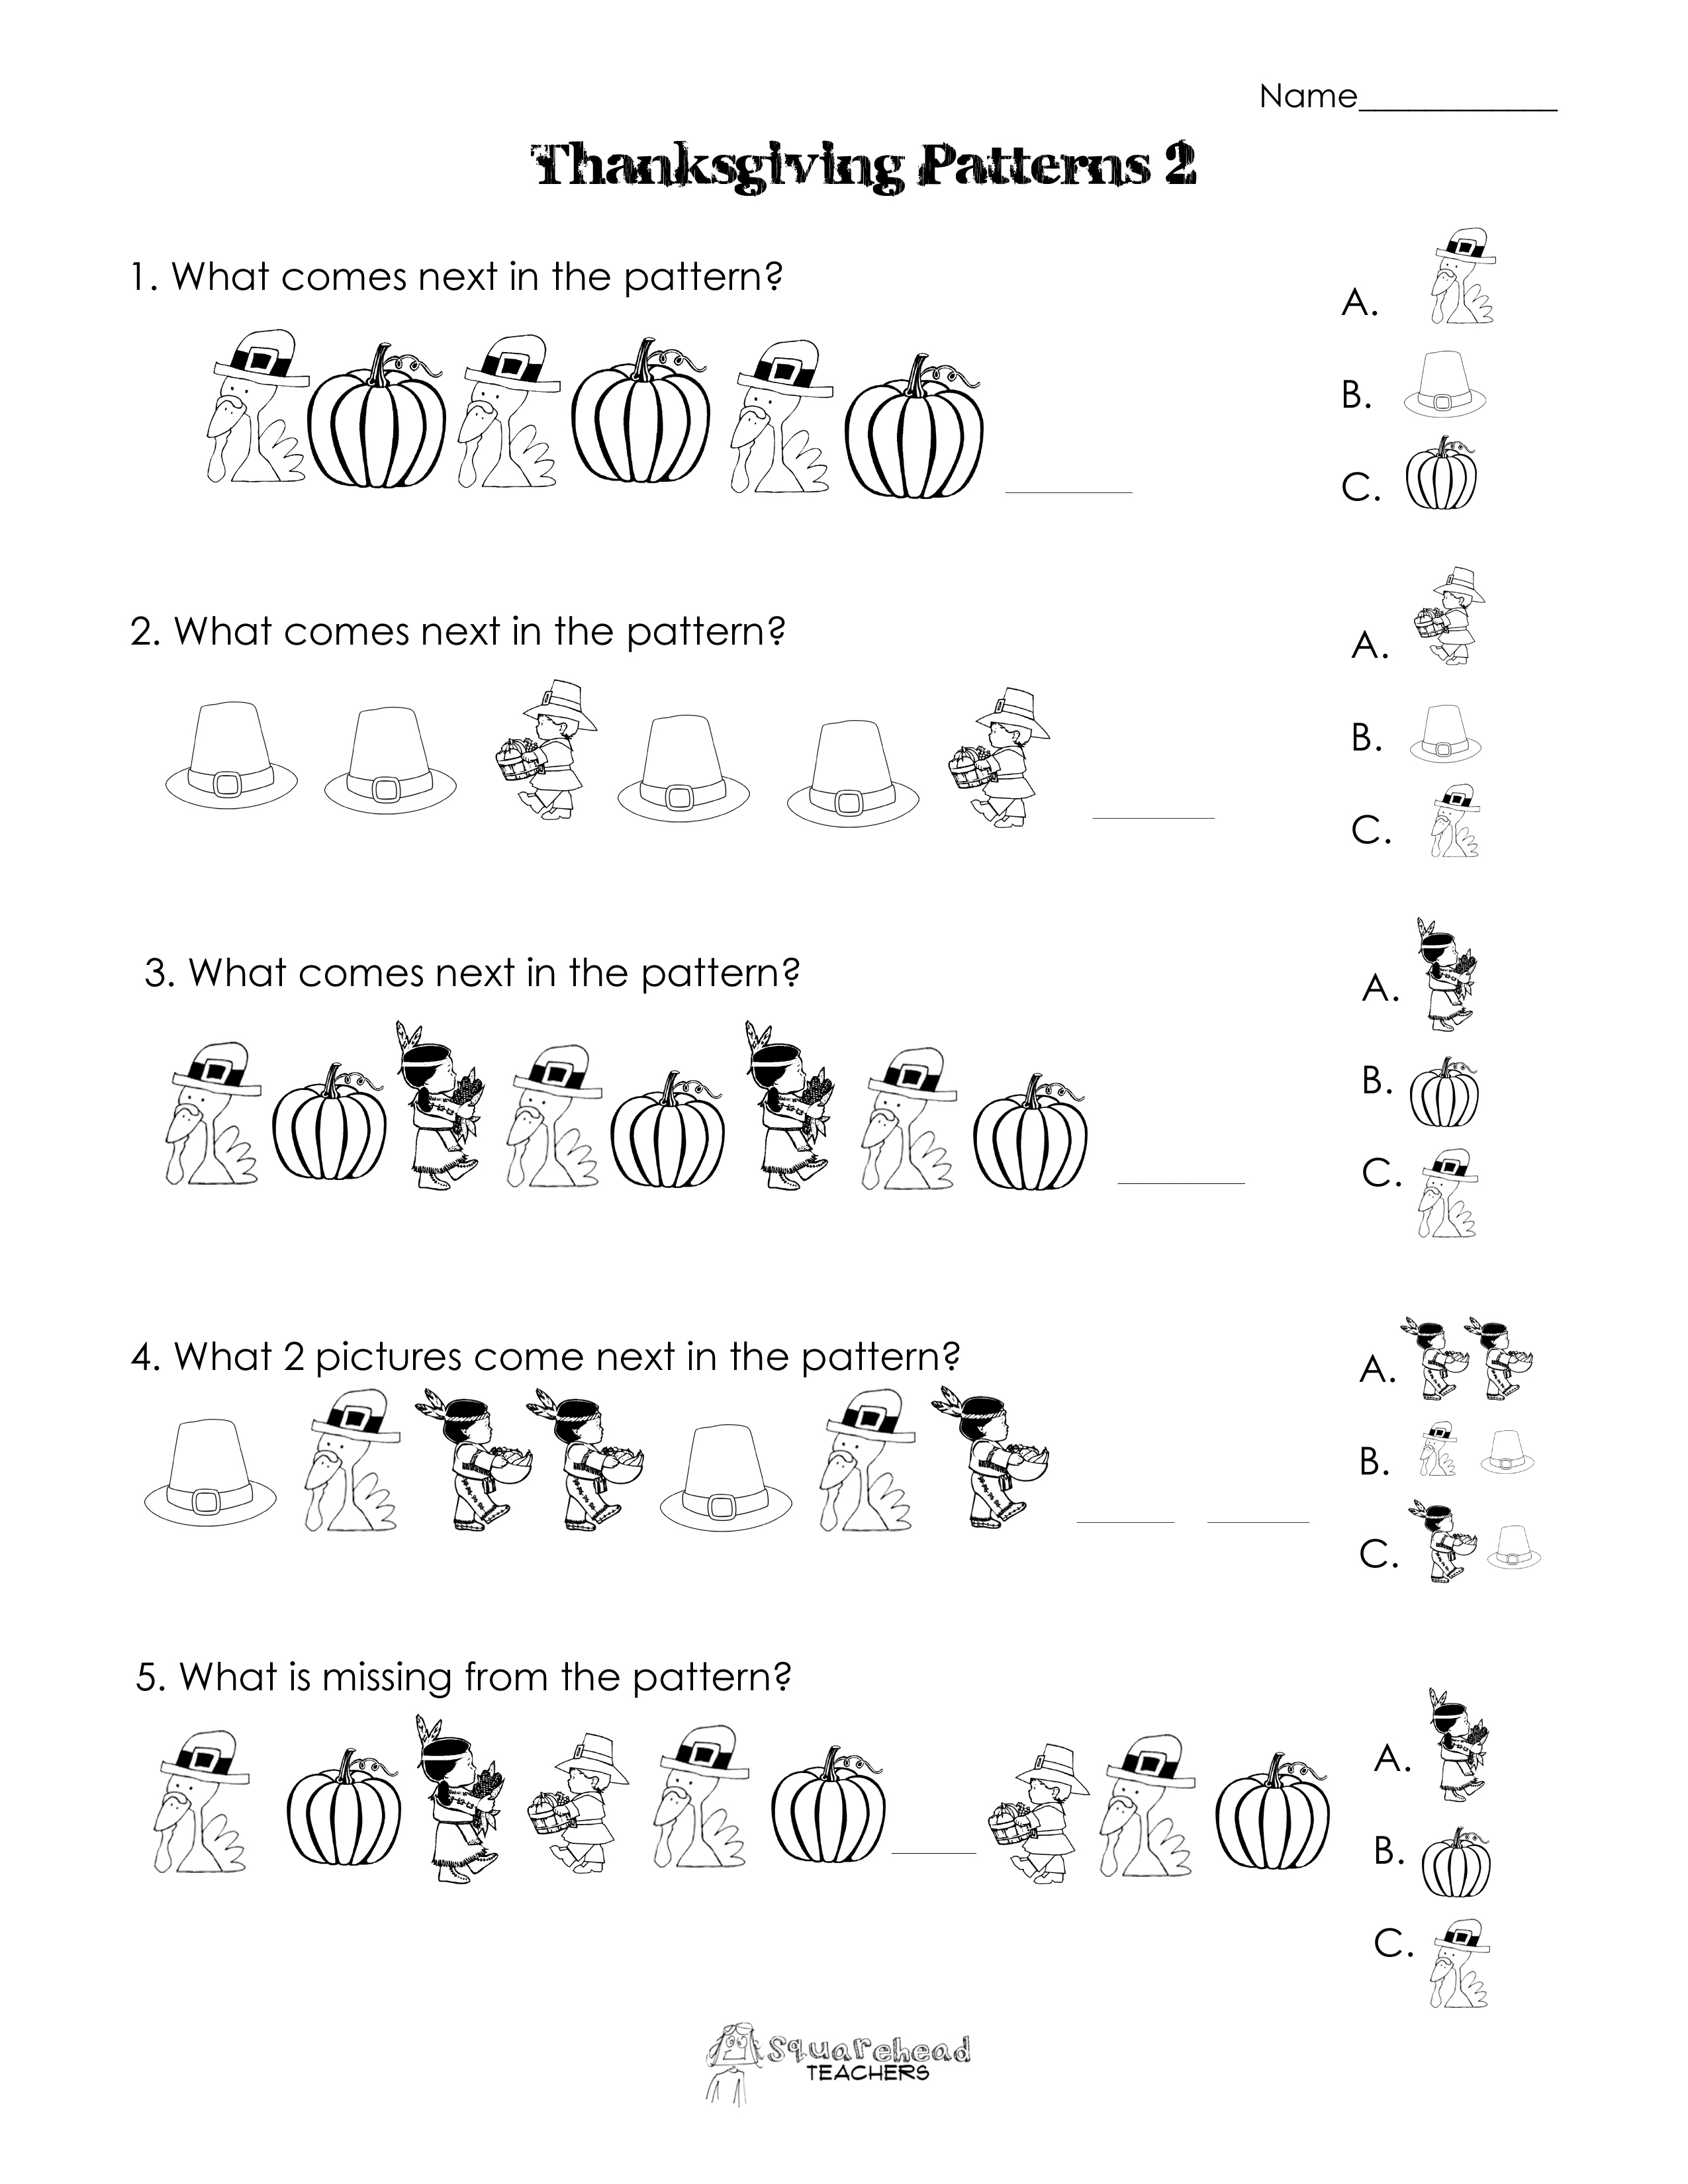 Another Thanksgiving Patterns Worksheet (K-2Nd) | Squarehead Teachers | Free Printable Thanksgiving Math Worksheets For 3Rd Grade